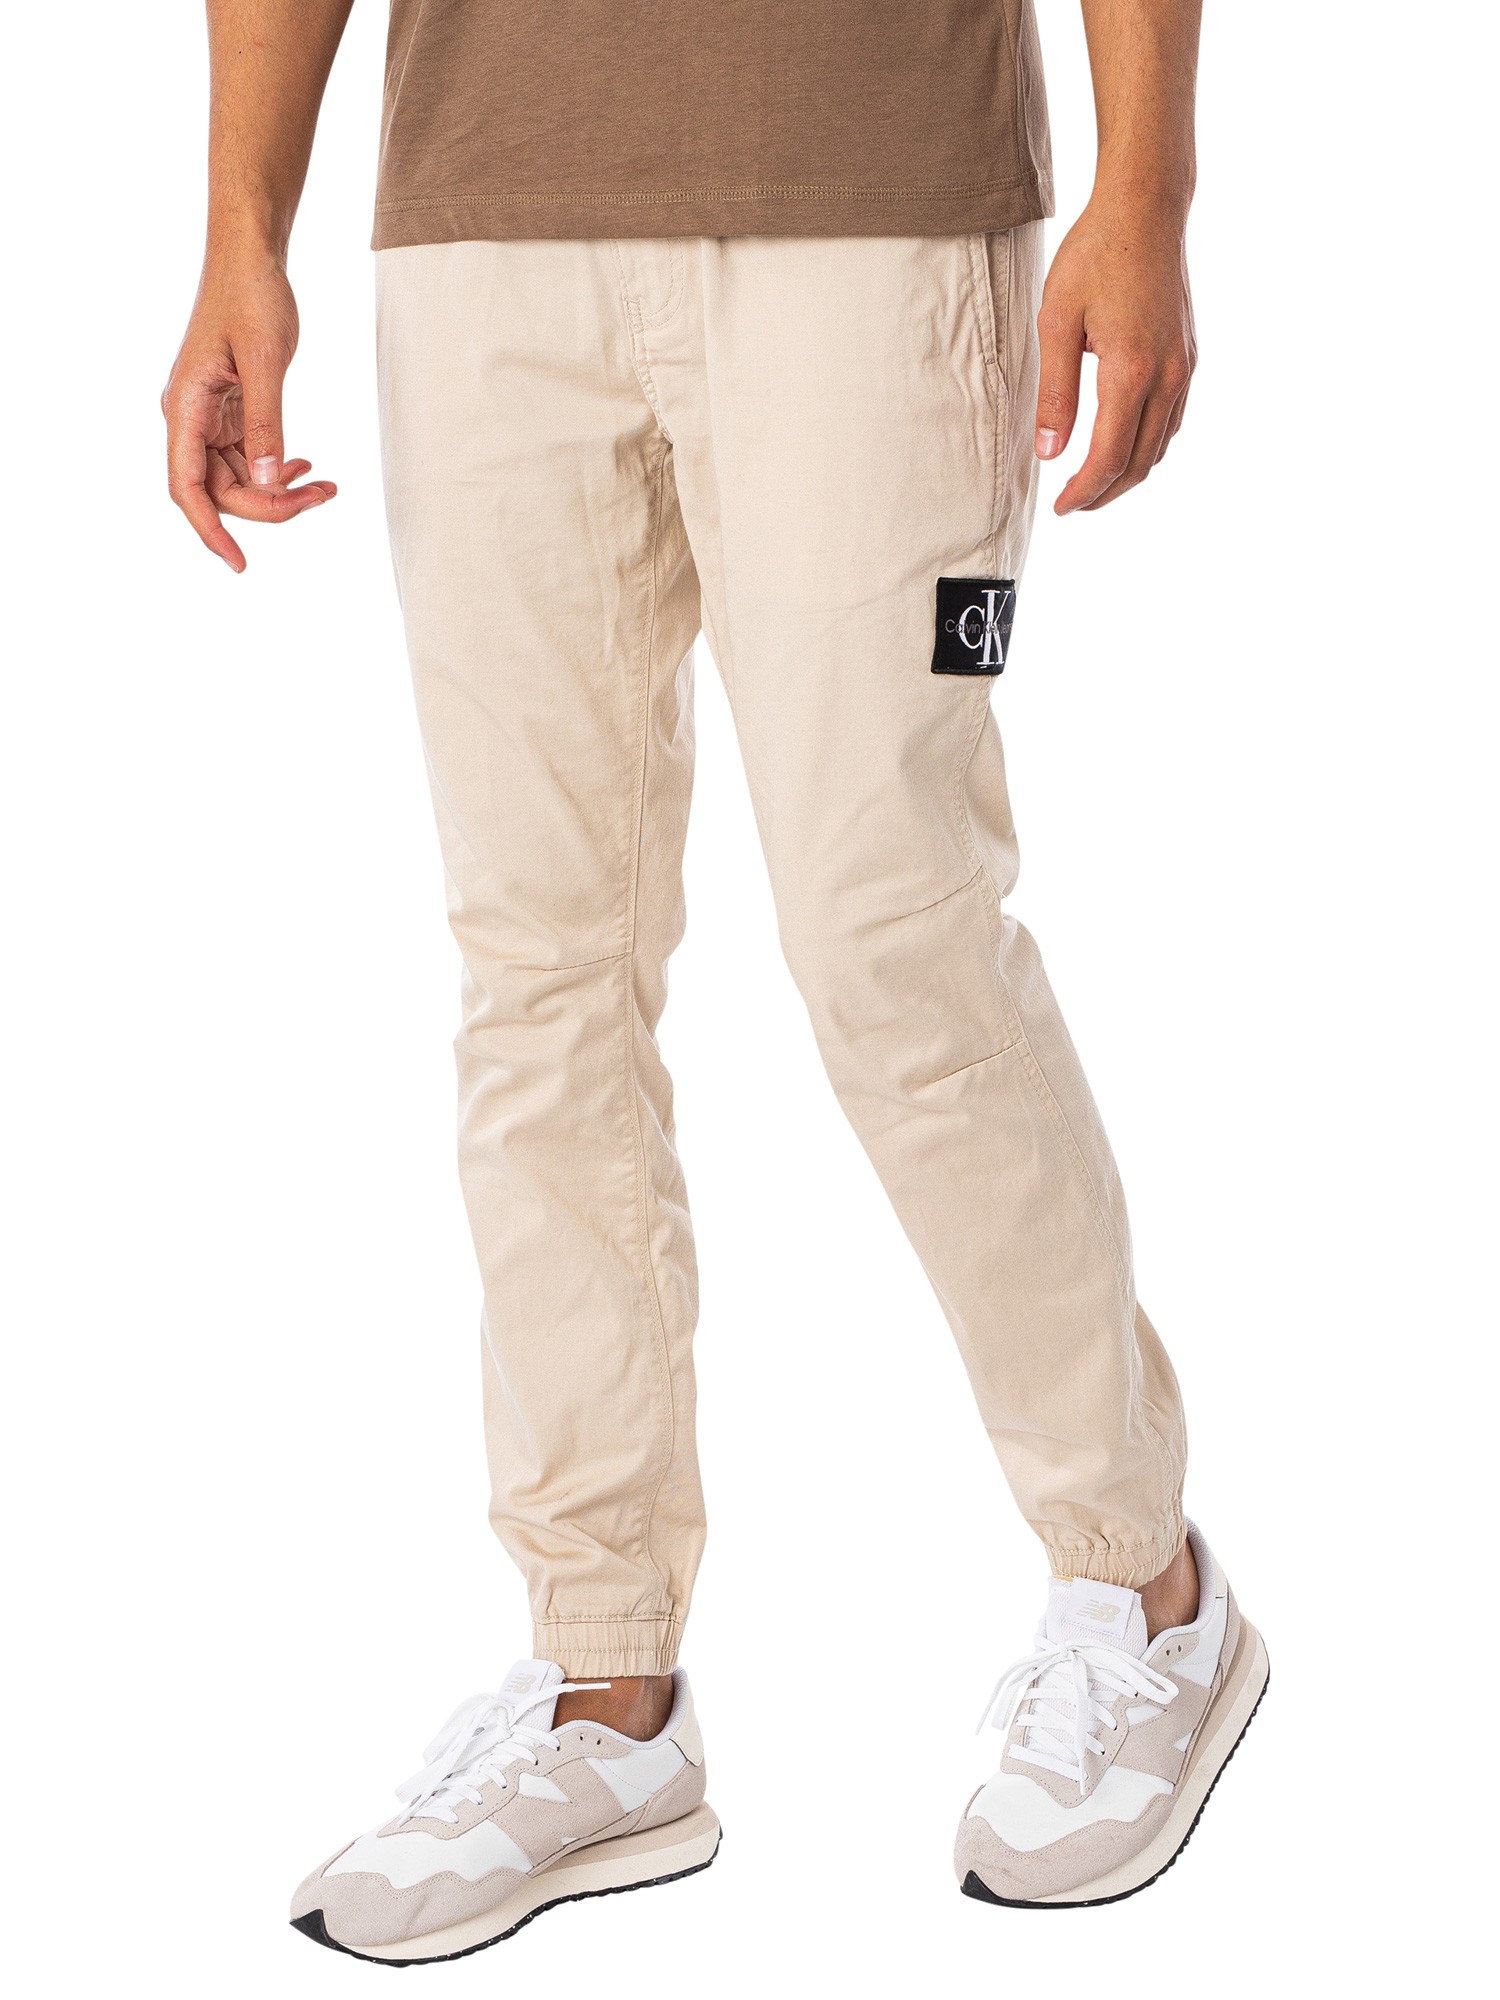 Calvin Klein Jeans Monologo Badge Casual Trousers - Classic Beige | Standout